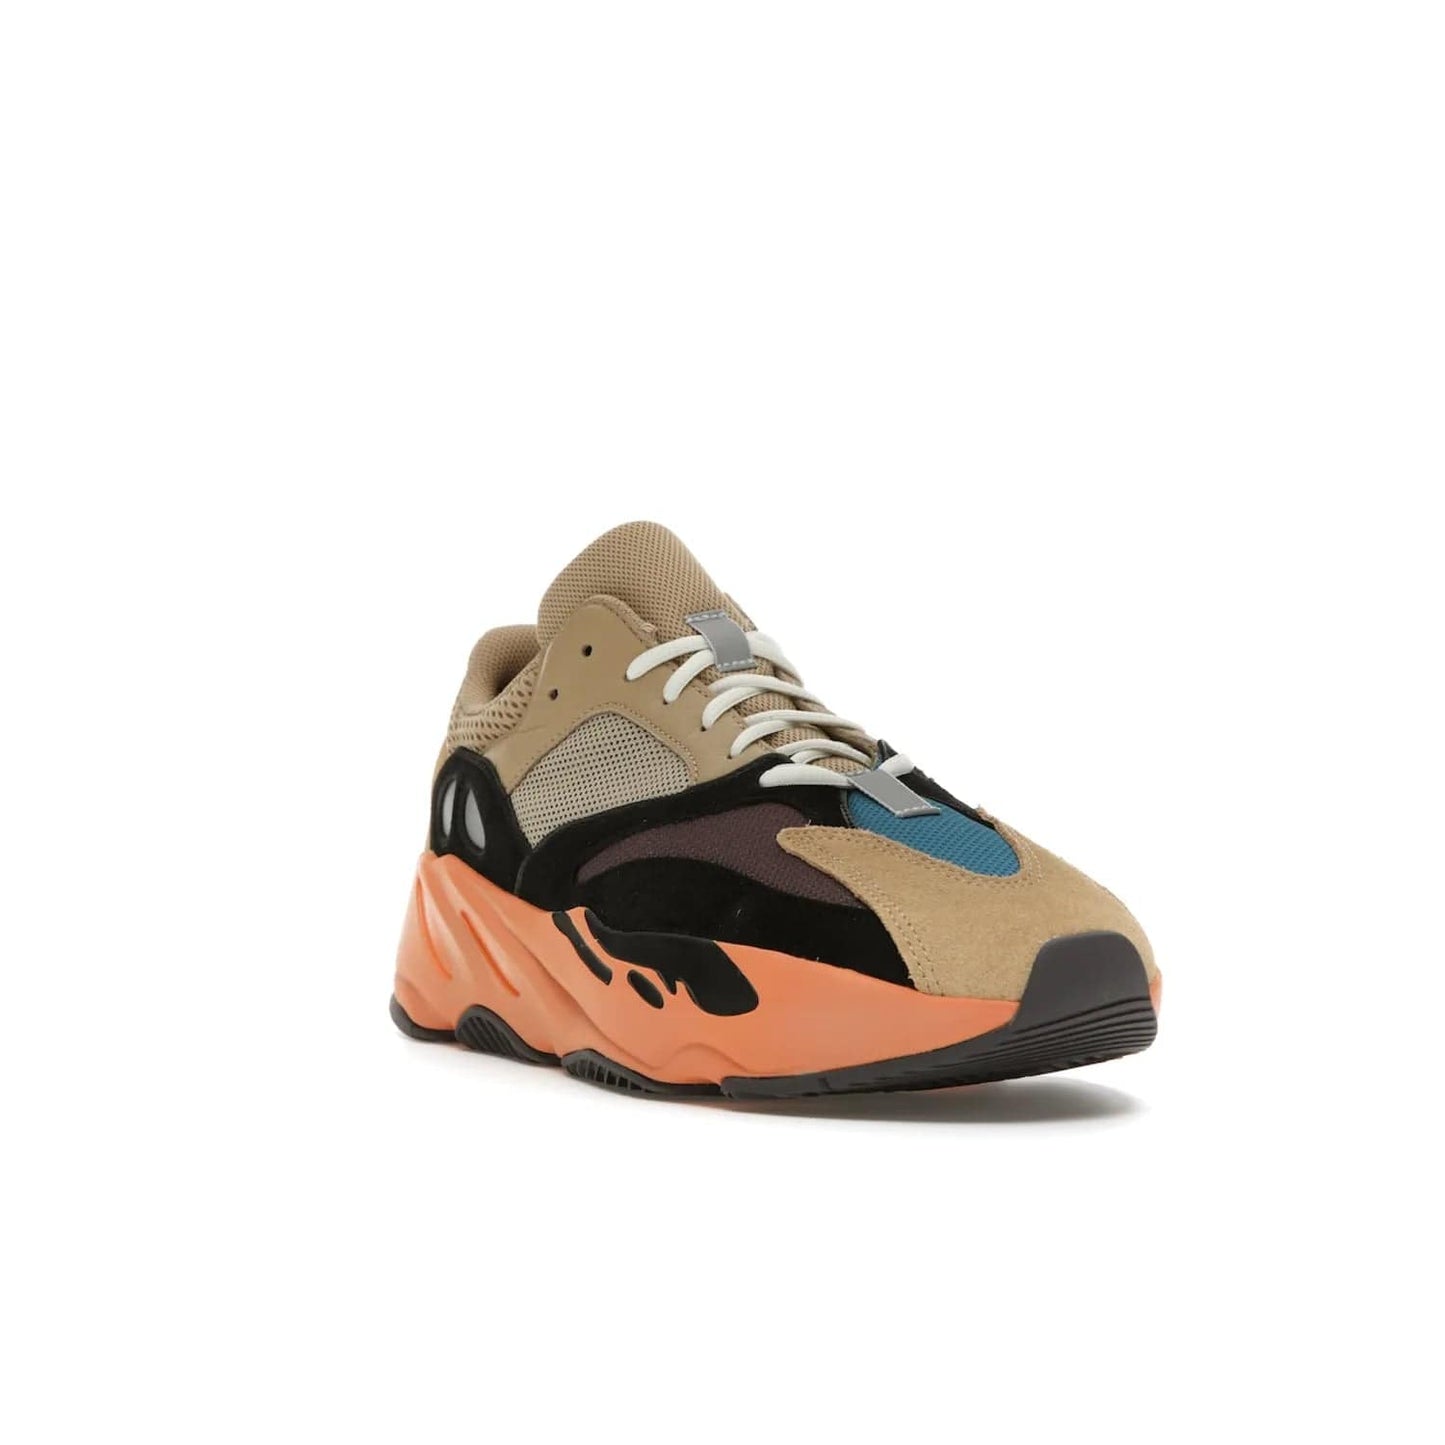 adidas Yeezy Boost 700 Enflame Amber - Image 7 - Only at www.BallersClubKickz.com - Adidas Yeezy Boost 700 Enflame Amber: Eye-catching design with pale yellow, brown, teal, and orange! Get yours in June 2021.